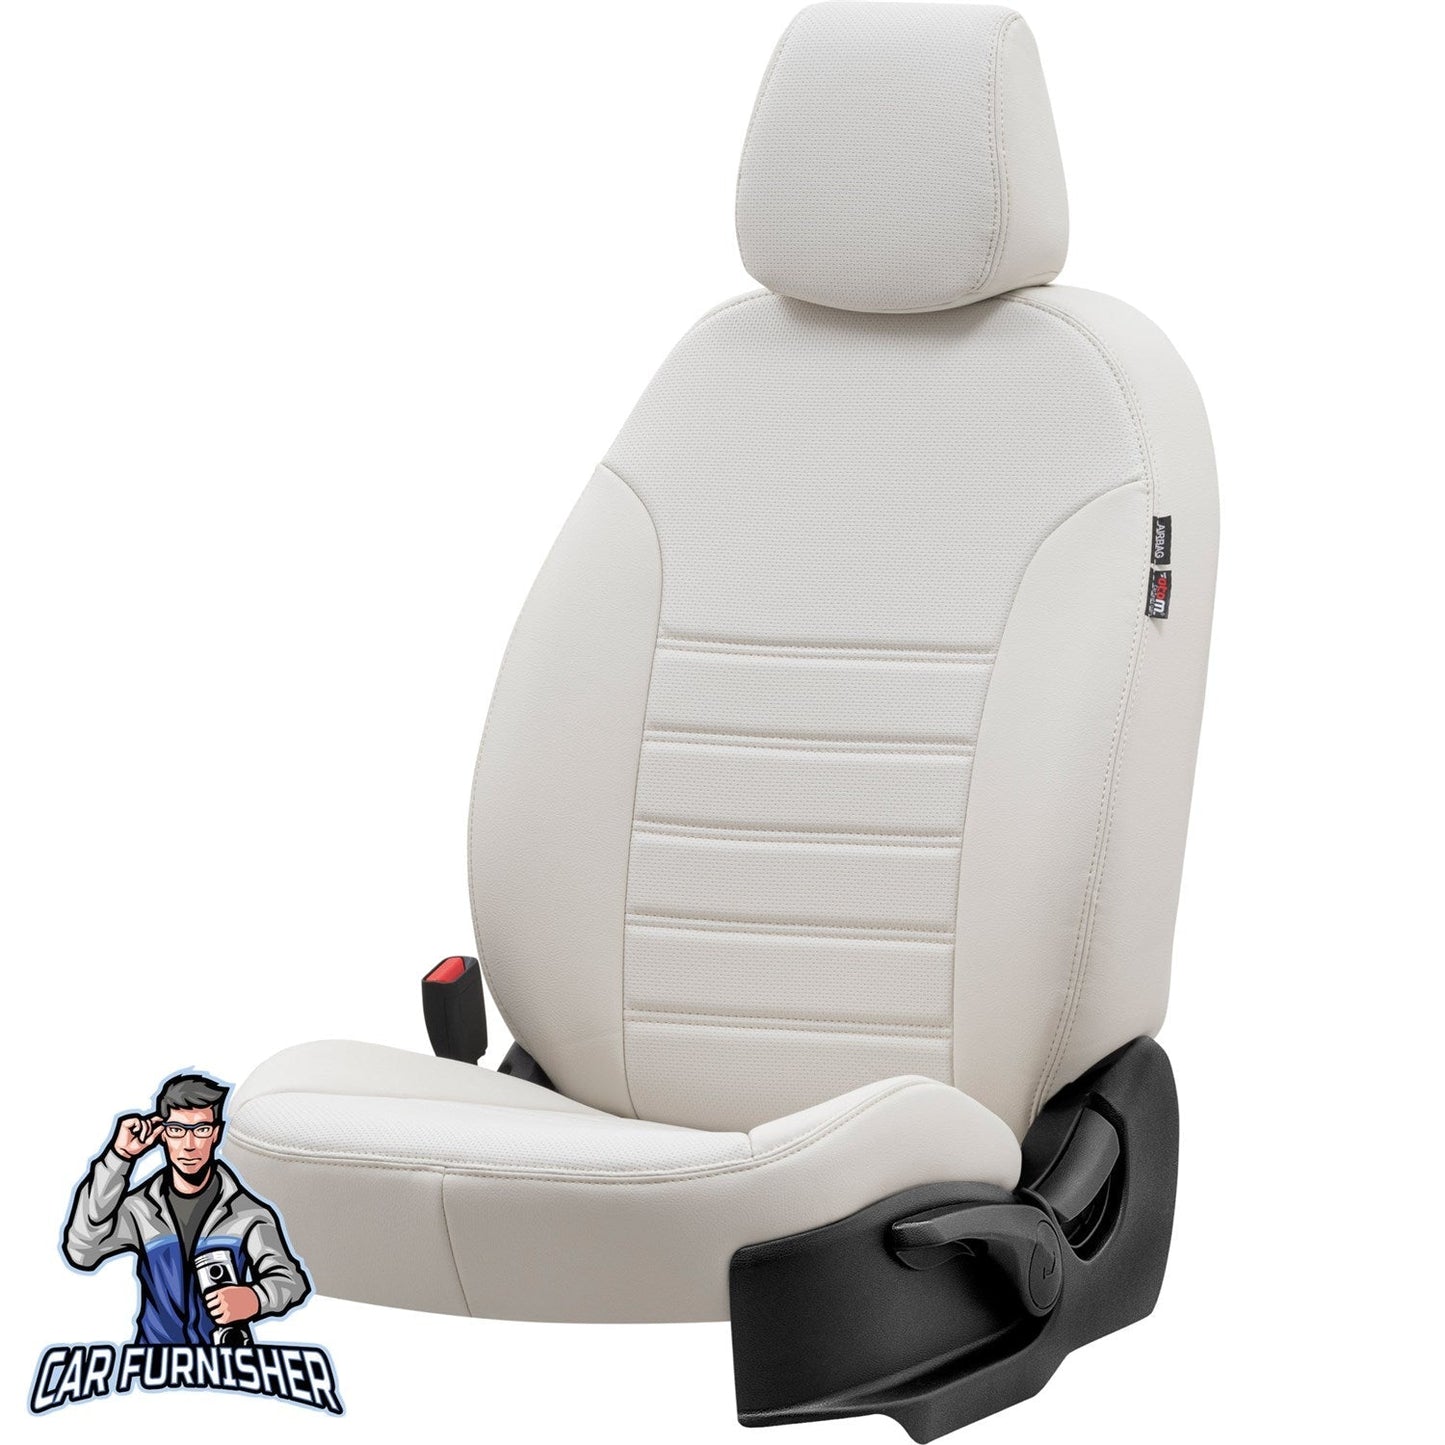 Peugeot Rifter Seat Covers New York Leather Design Ivory Leather